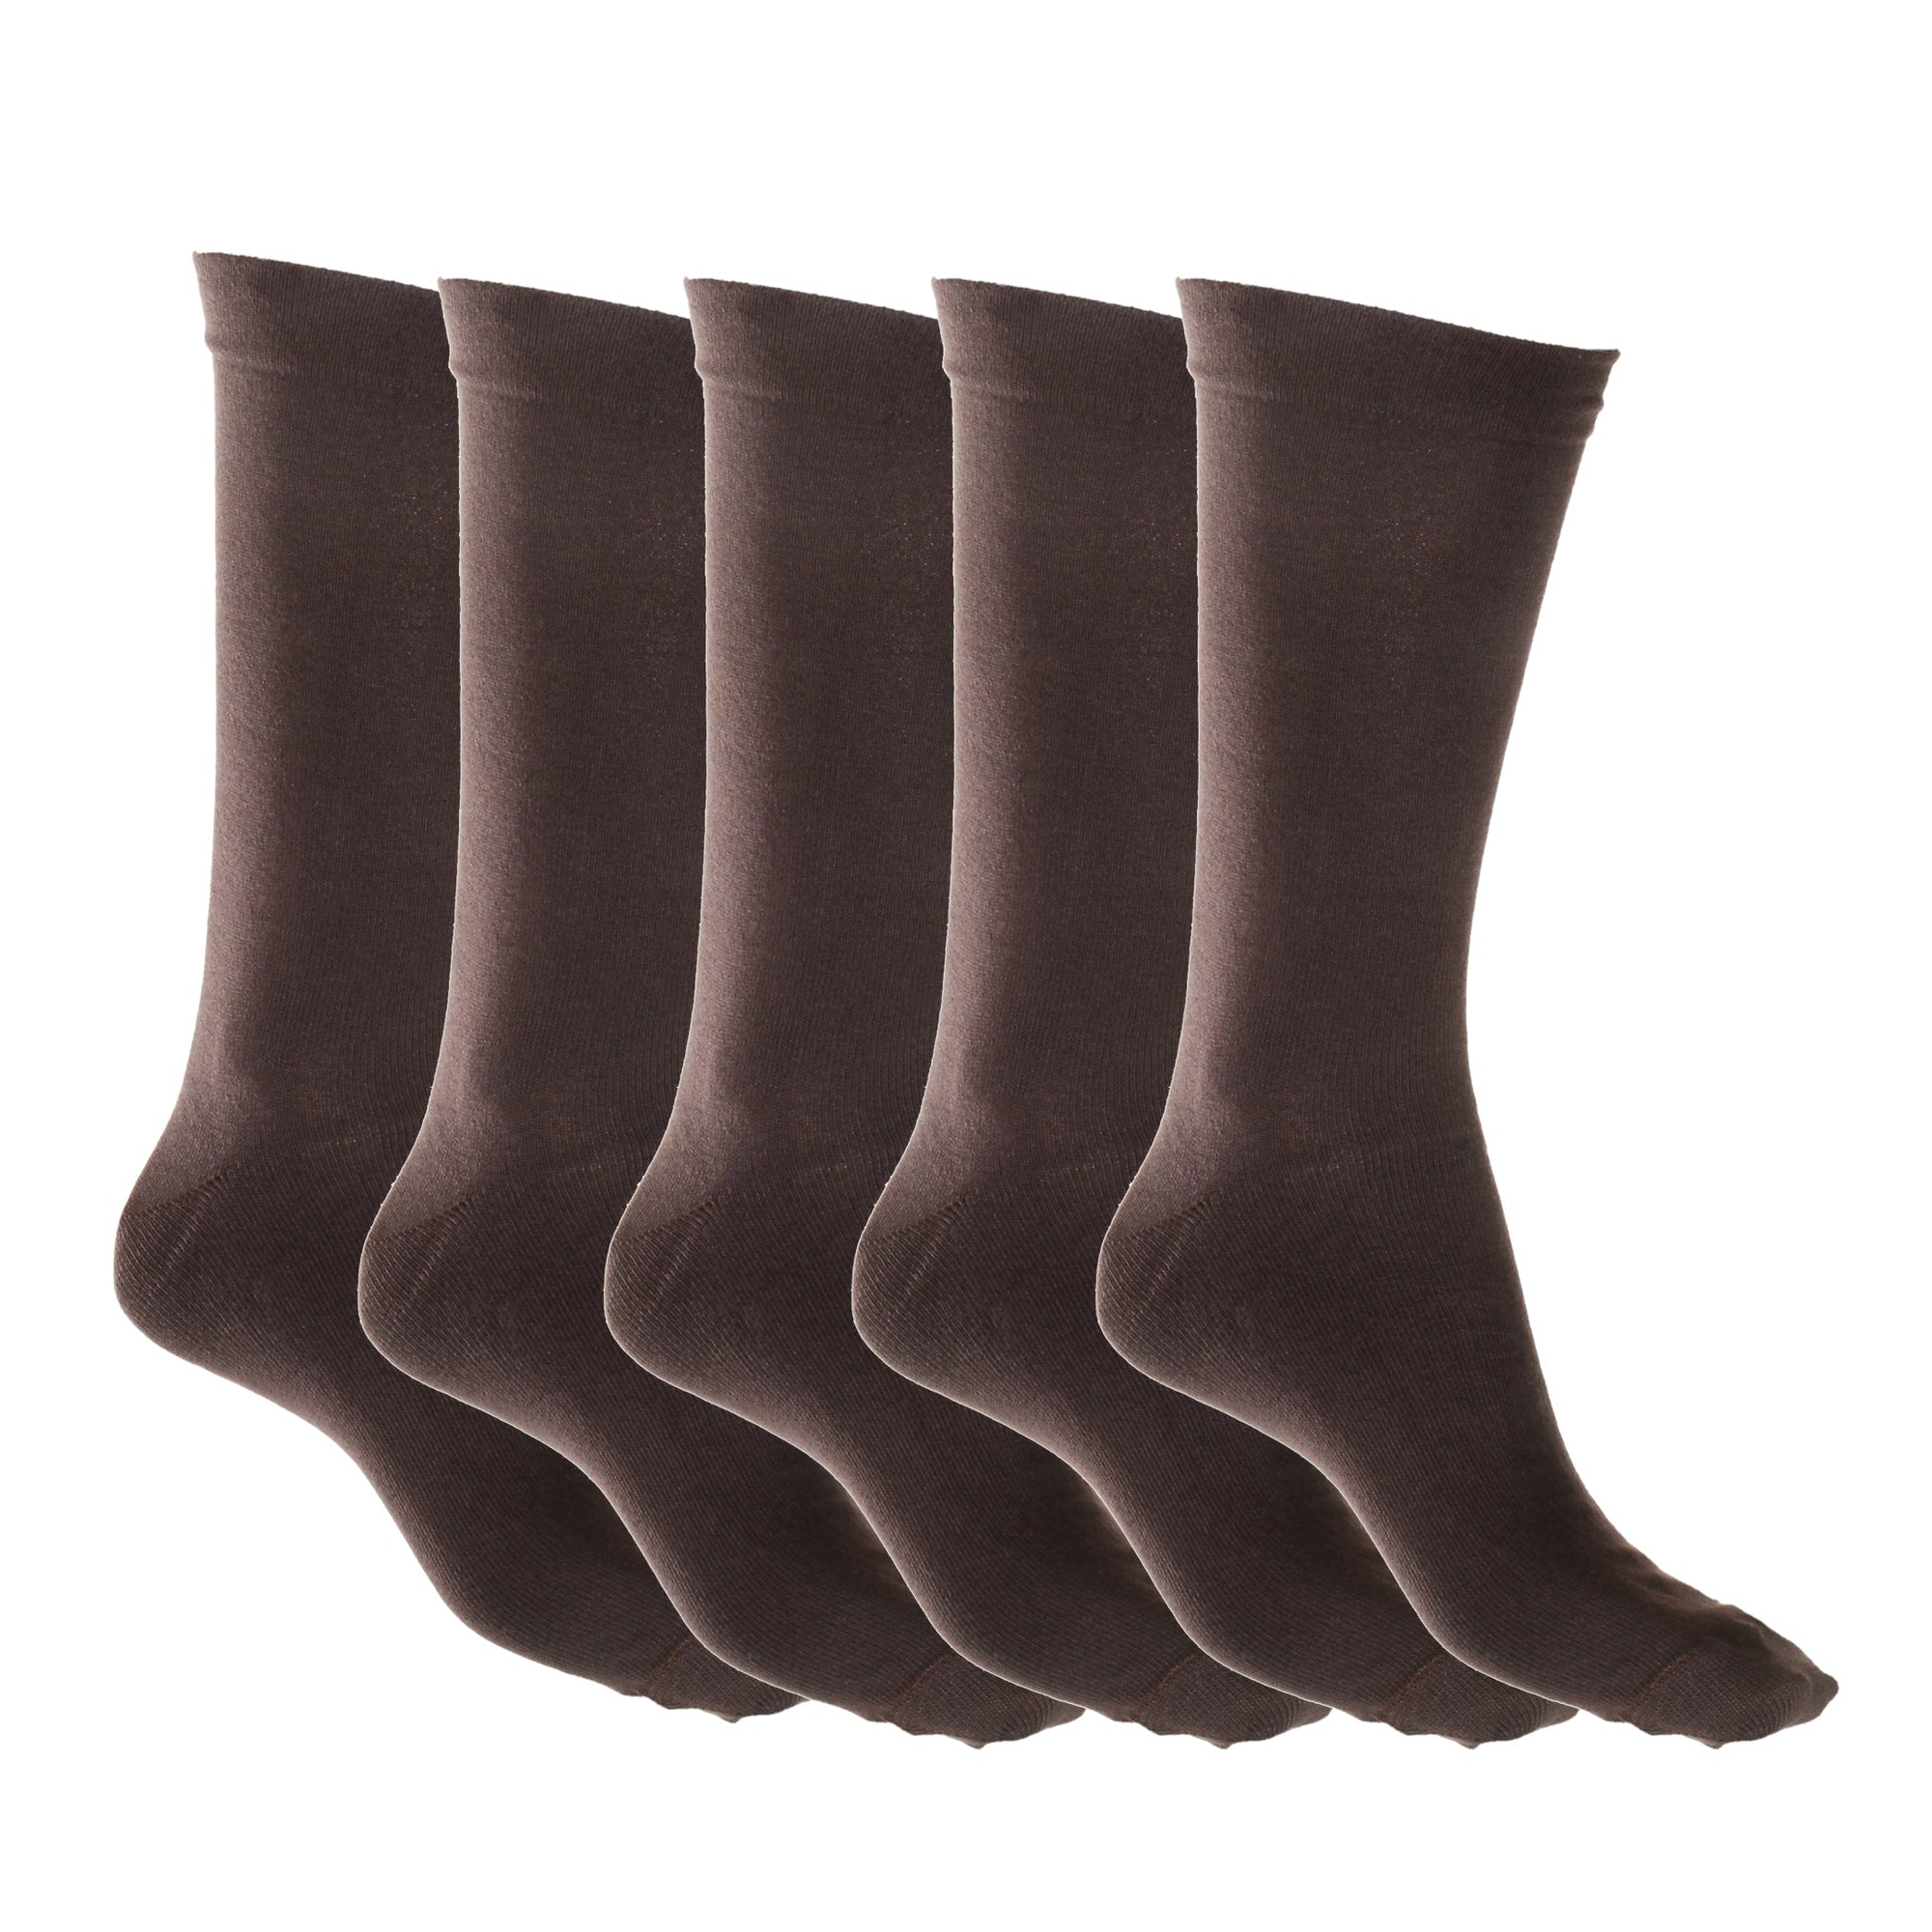 Loose Top Cotton Sock with Tough Toe™ Chocolate - 5 Pack Sale